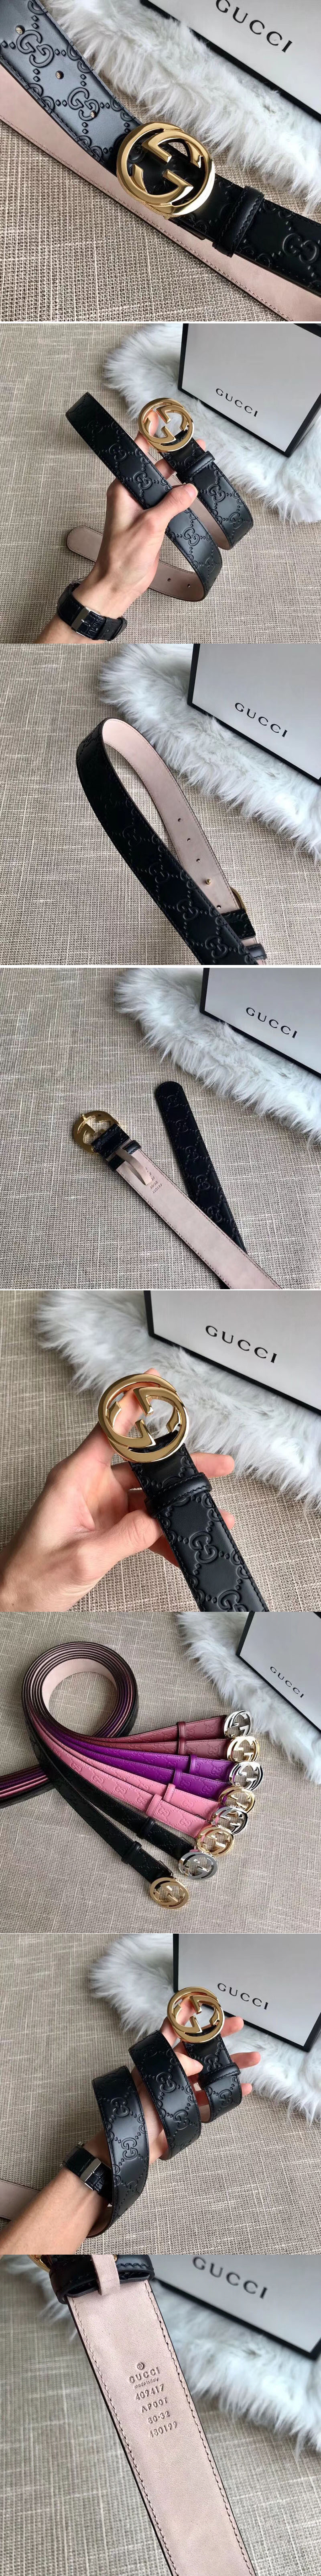 Replica Gucci 409417 35mm Signature leather belt Black Leather Gold G buckle